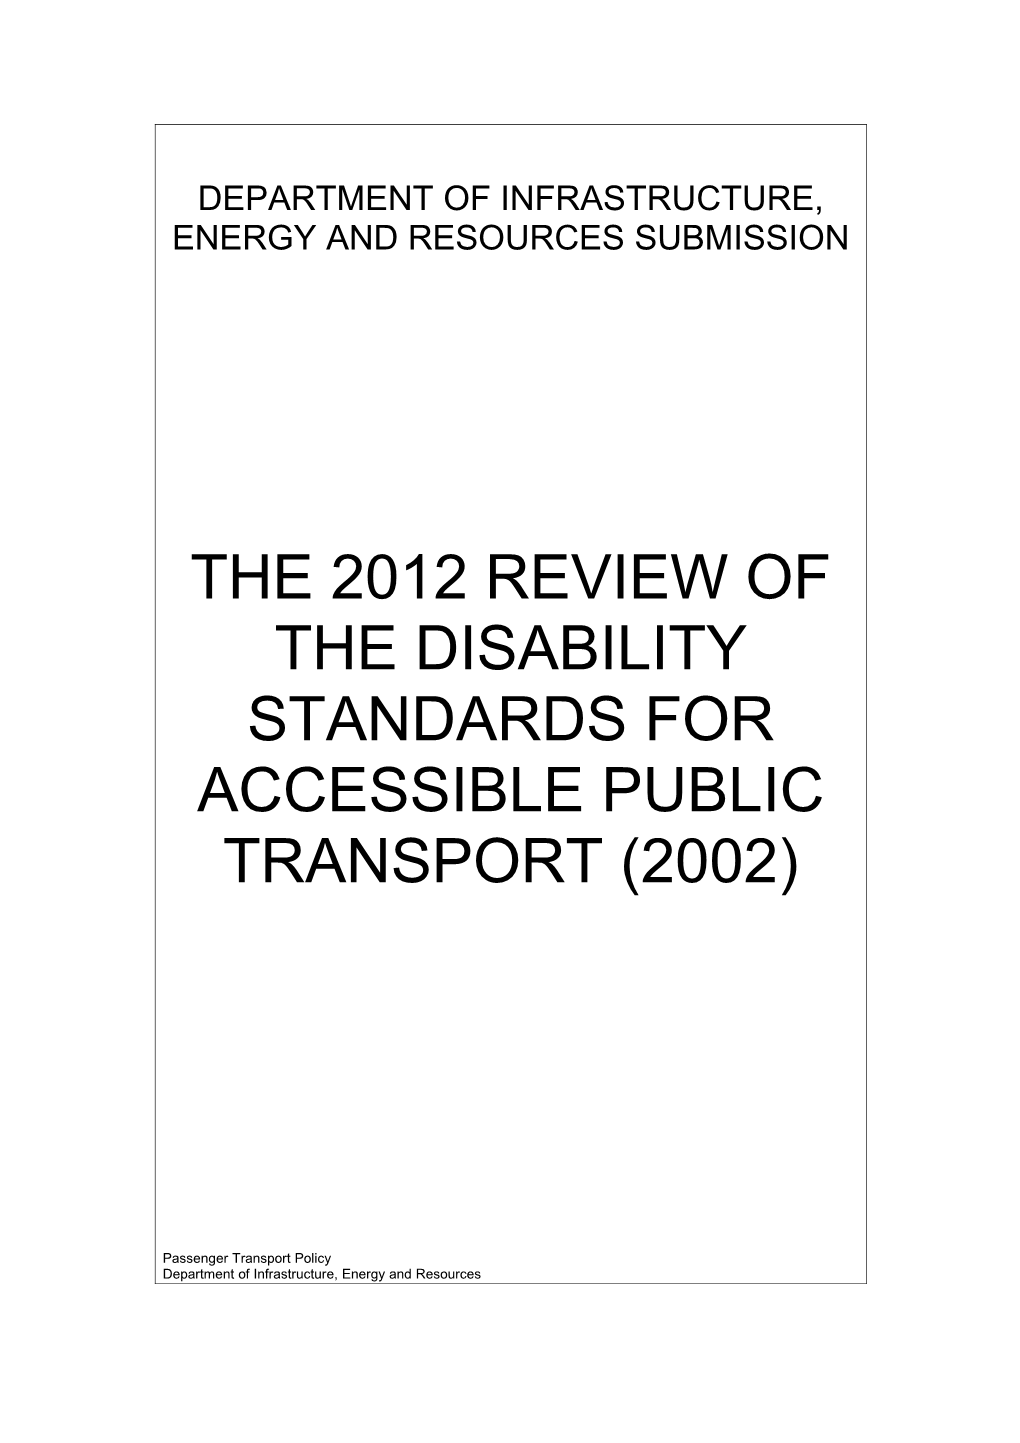 Department of Infrastructure, Energy and Resources Submission